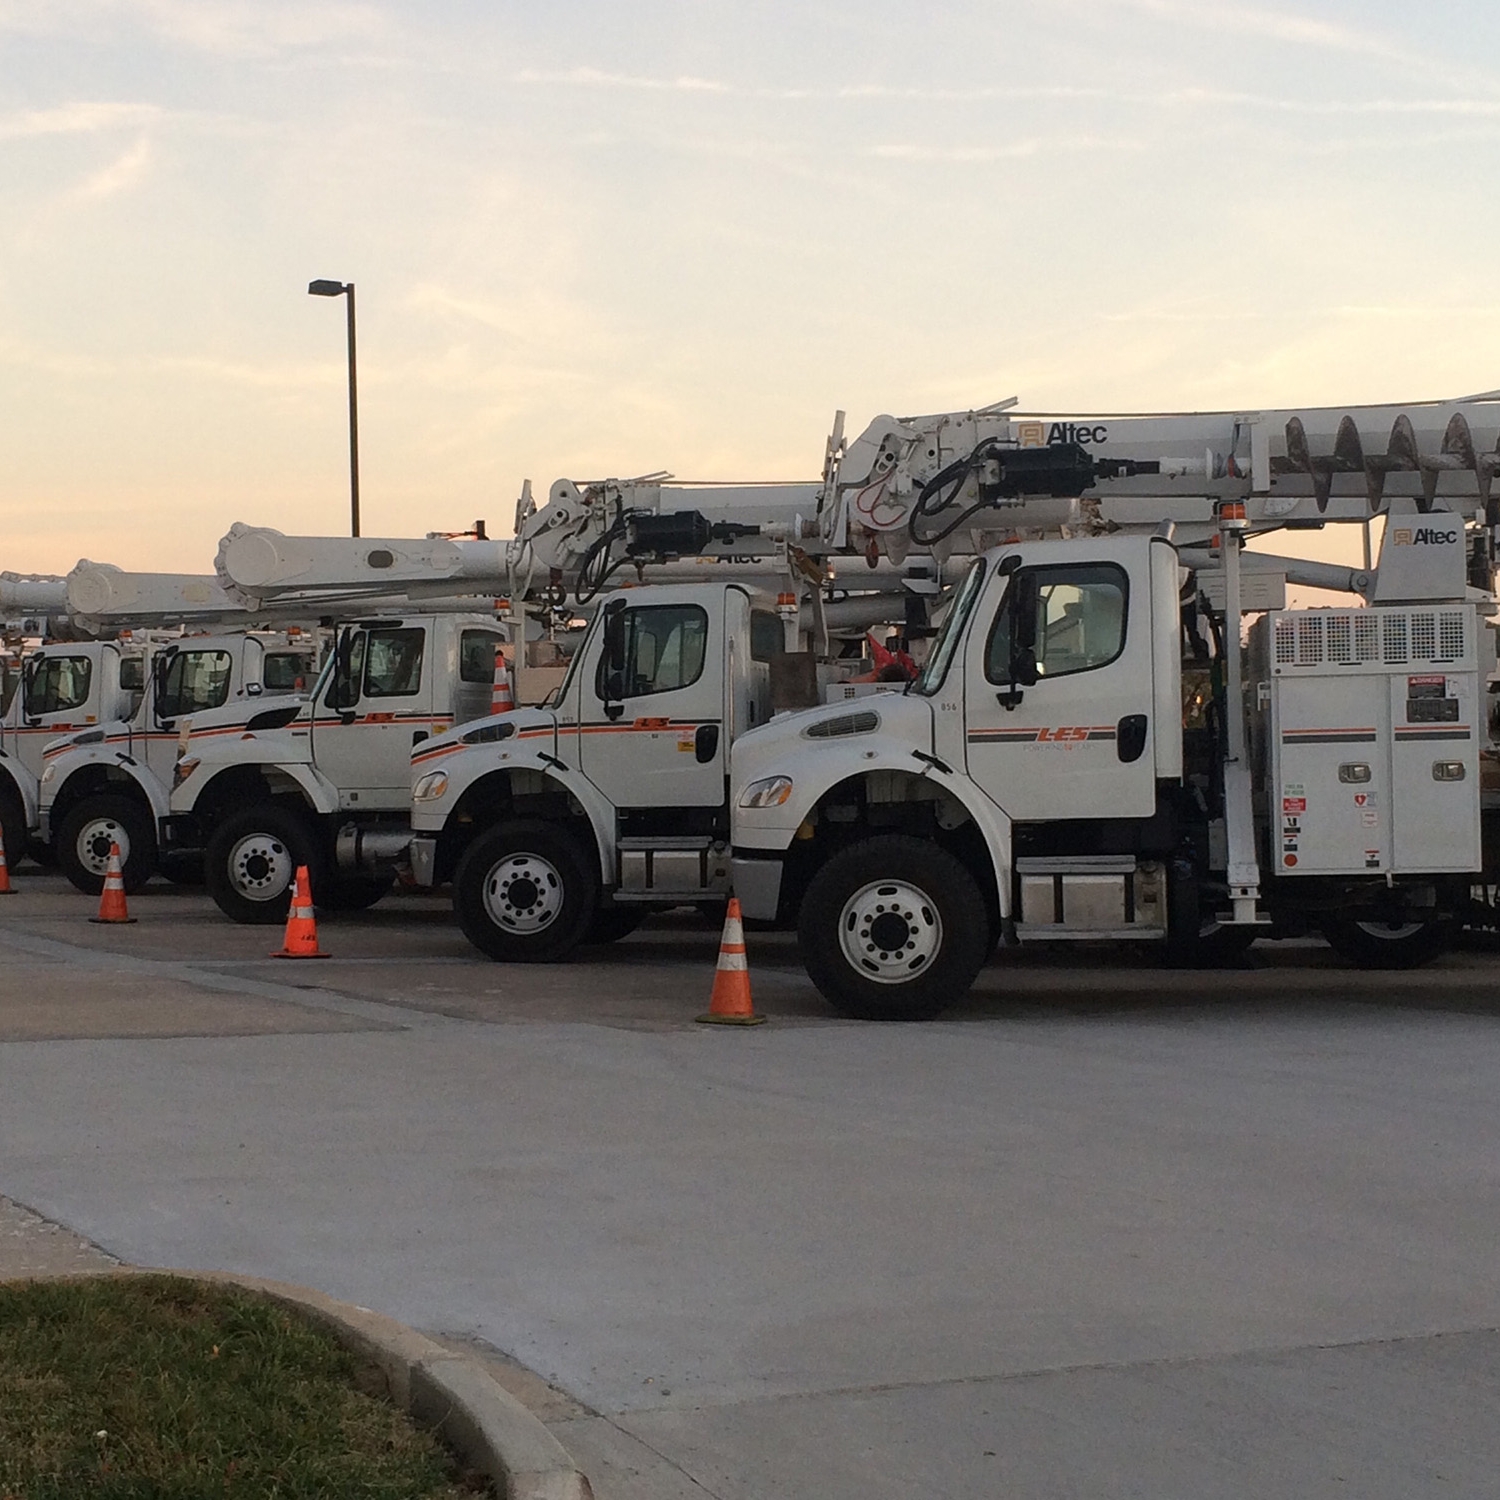 LES Mutual Aid - Trucks lined up